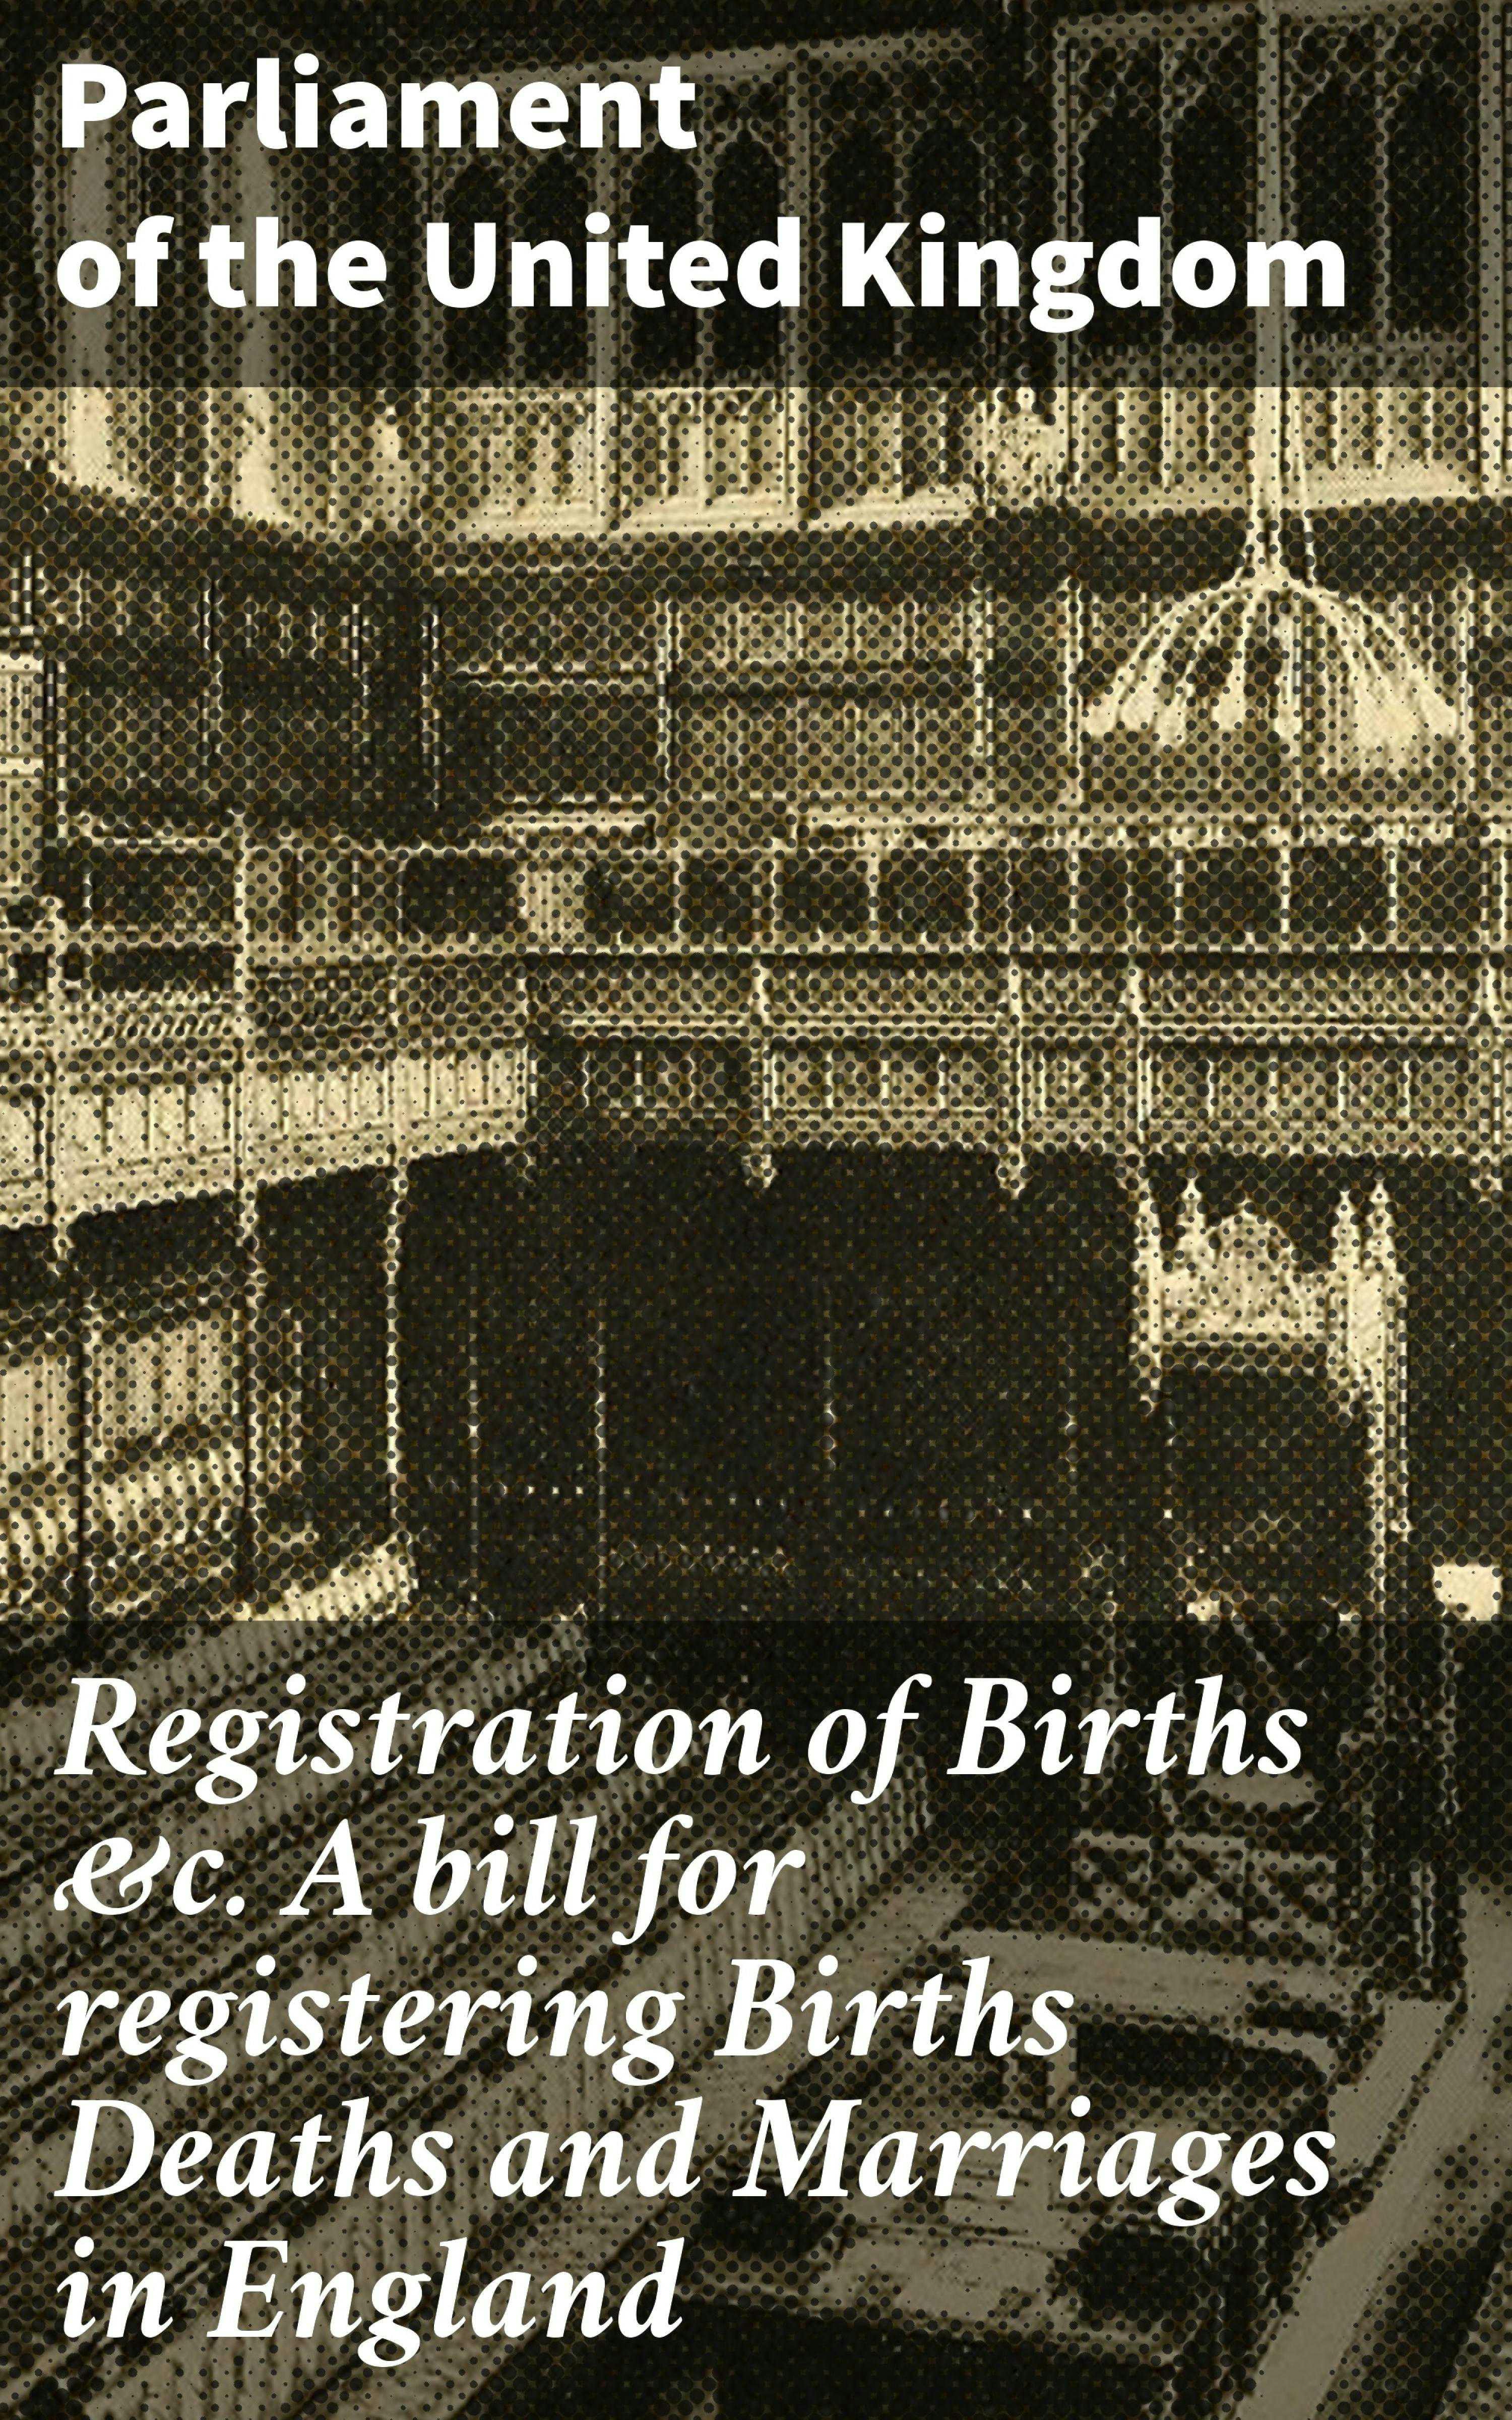 Registration of Births &c. A bill for registering Births Deaths and Marriages in England - Parliament of the United Kingdom